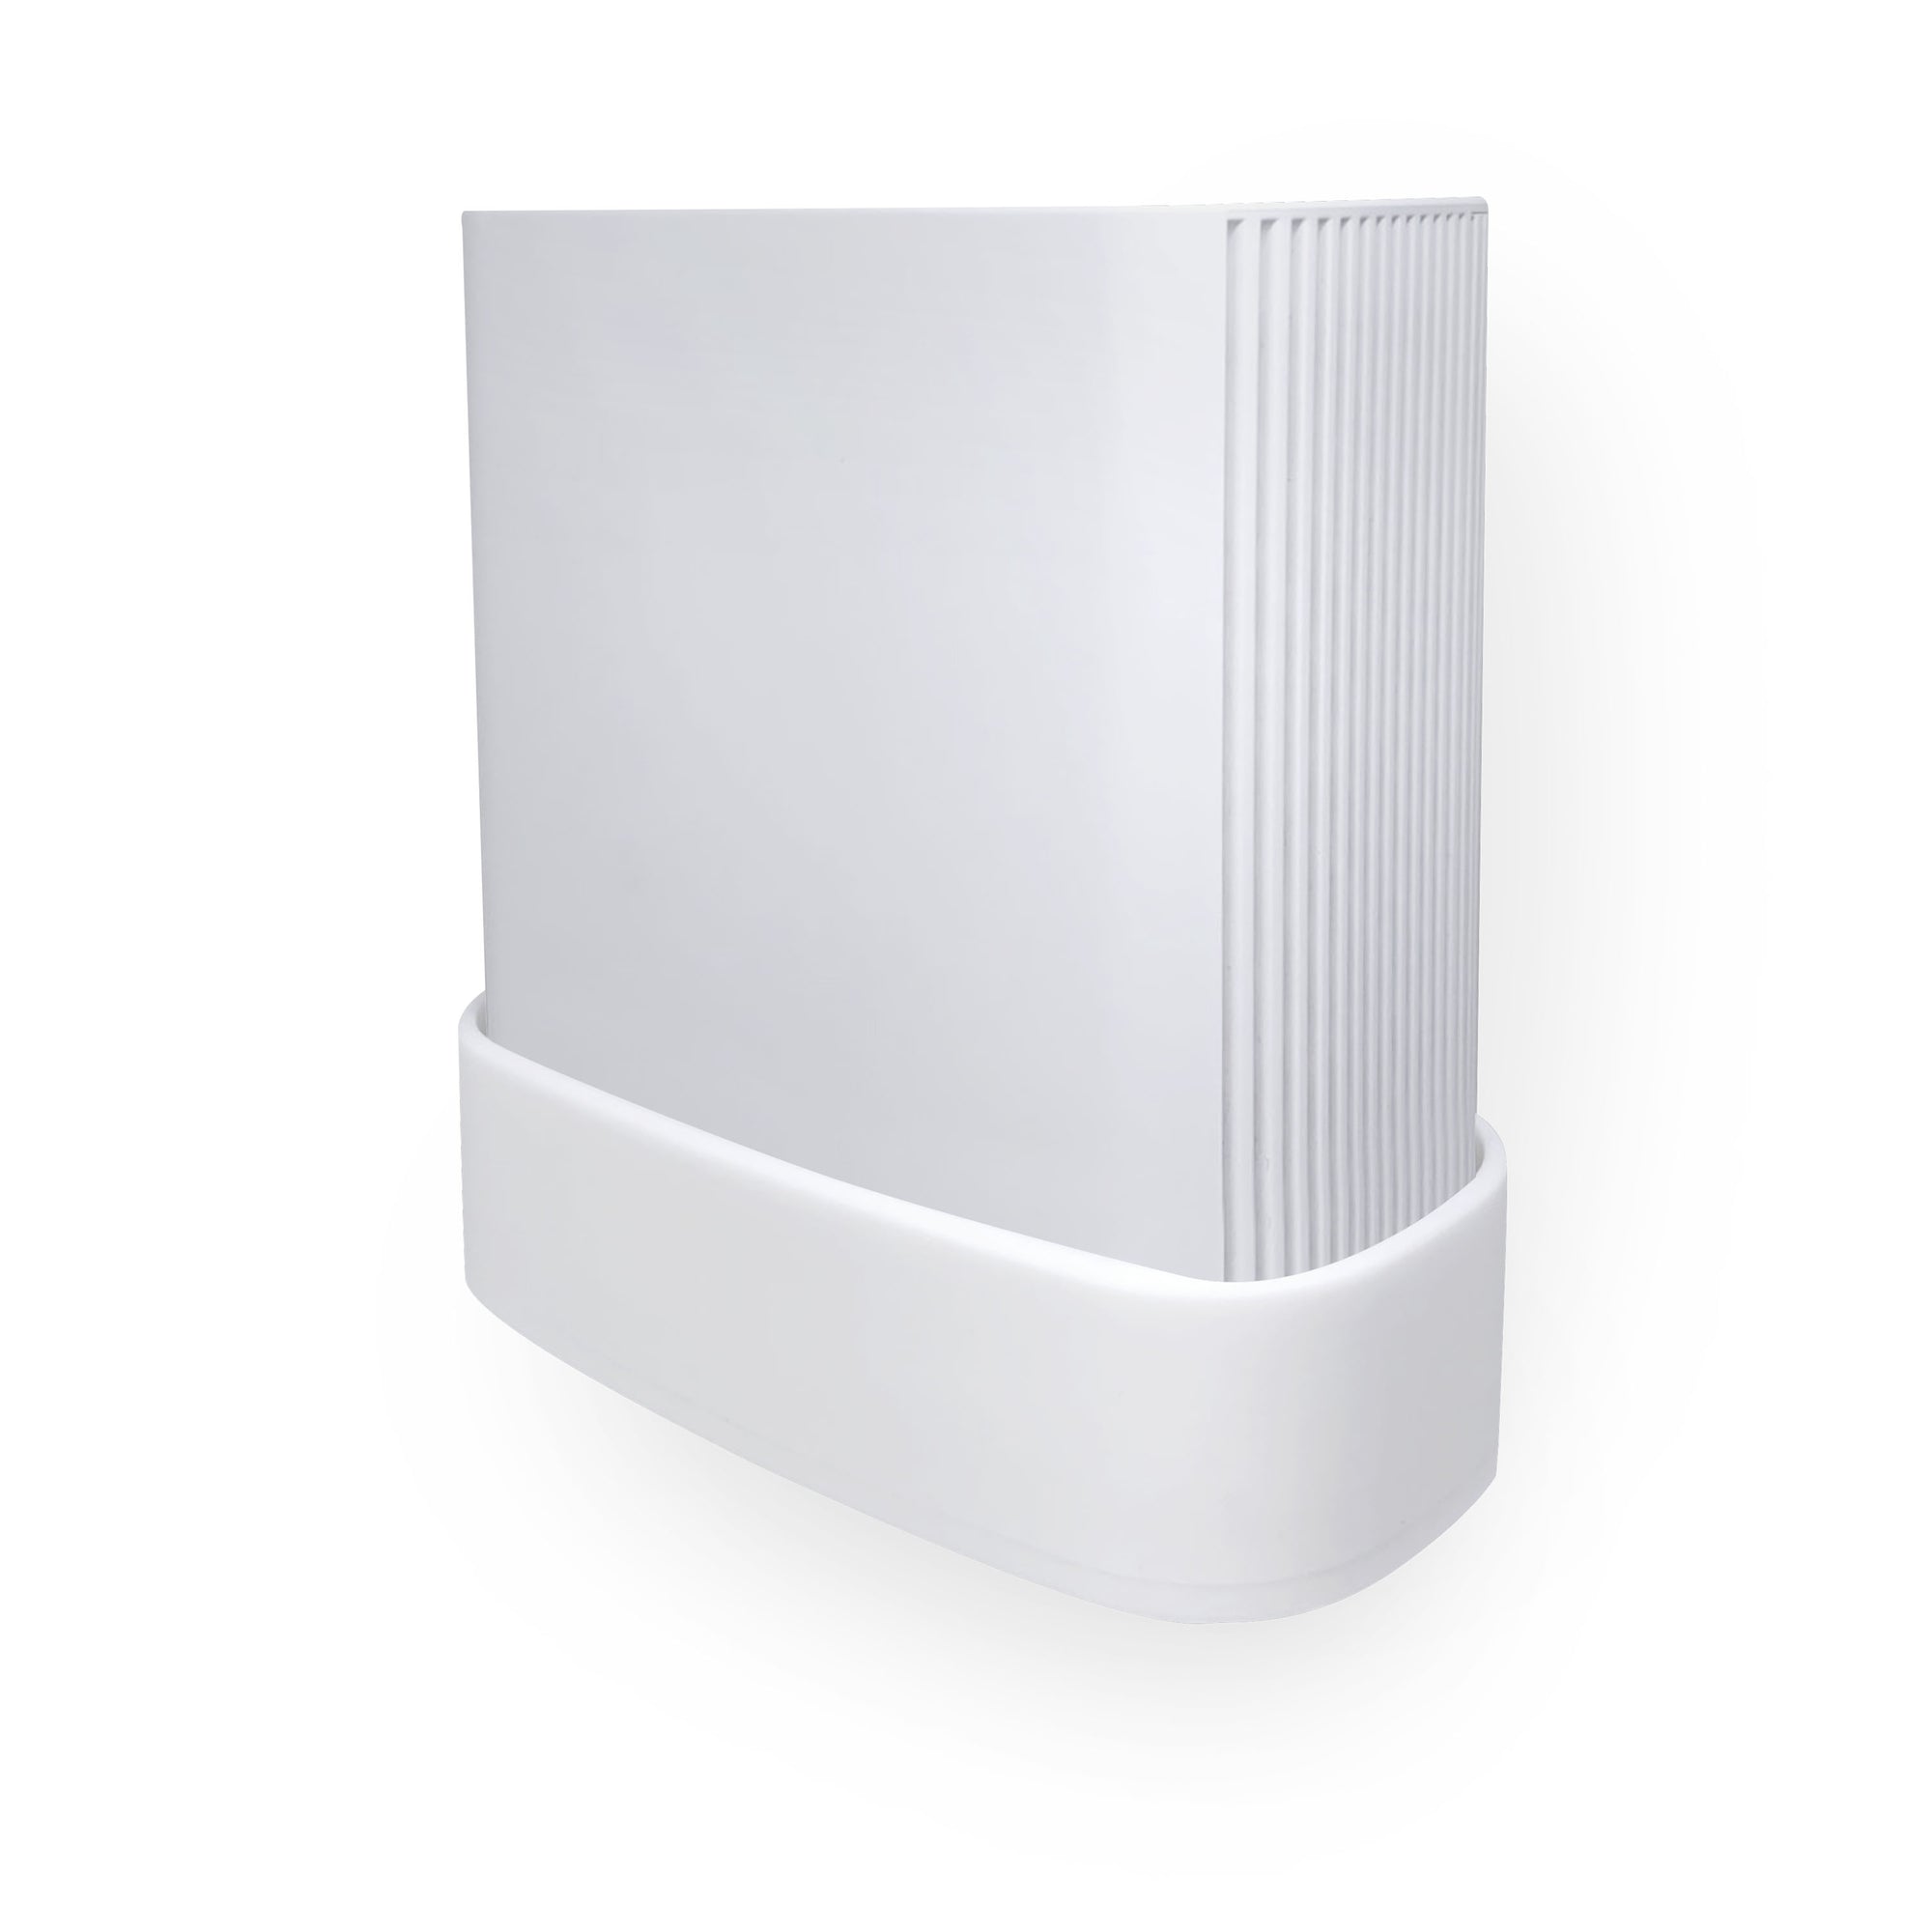 Adhesive Wall Mount for Asus ZenWifi XT8, XT9 & CT8 WiFi Router, Easy To Install Holder, Stick On & Screw In Mounting